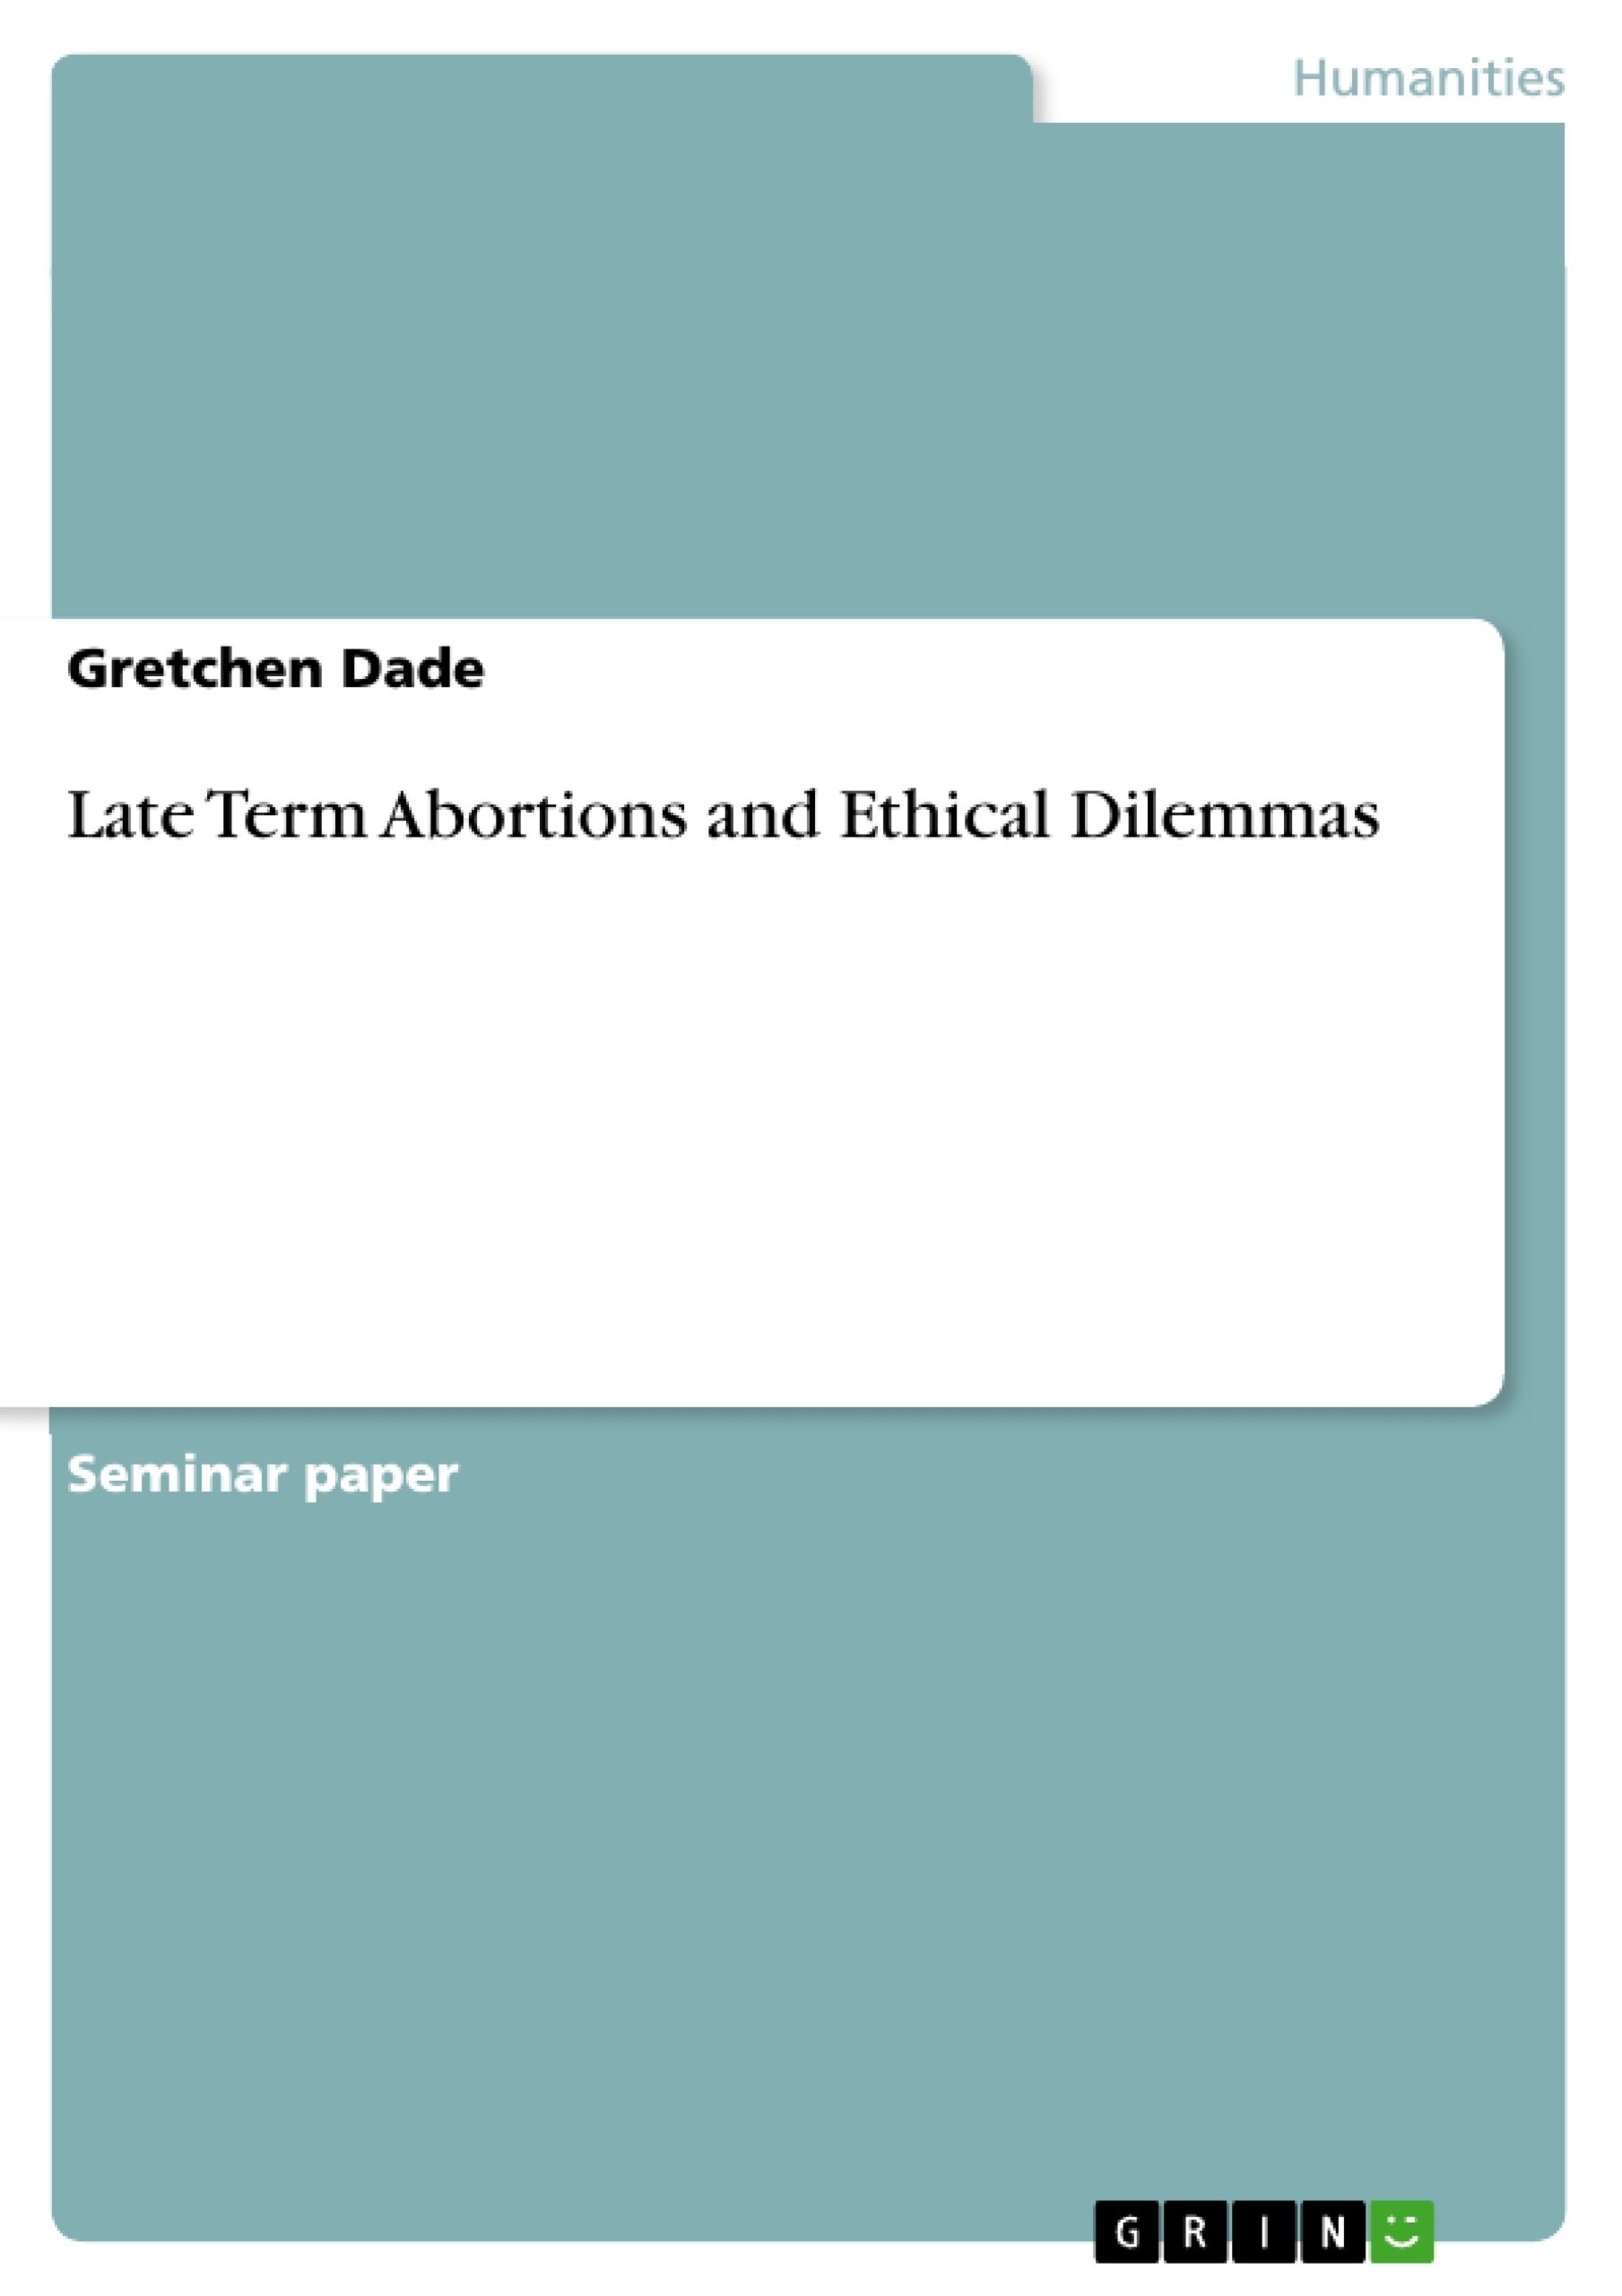 Title: Late Term Abortions and Ethical Dilemmas